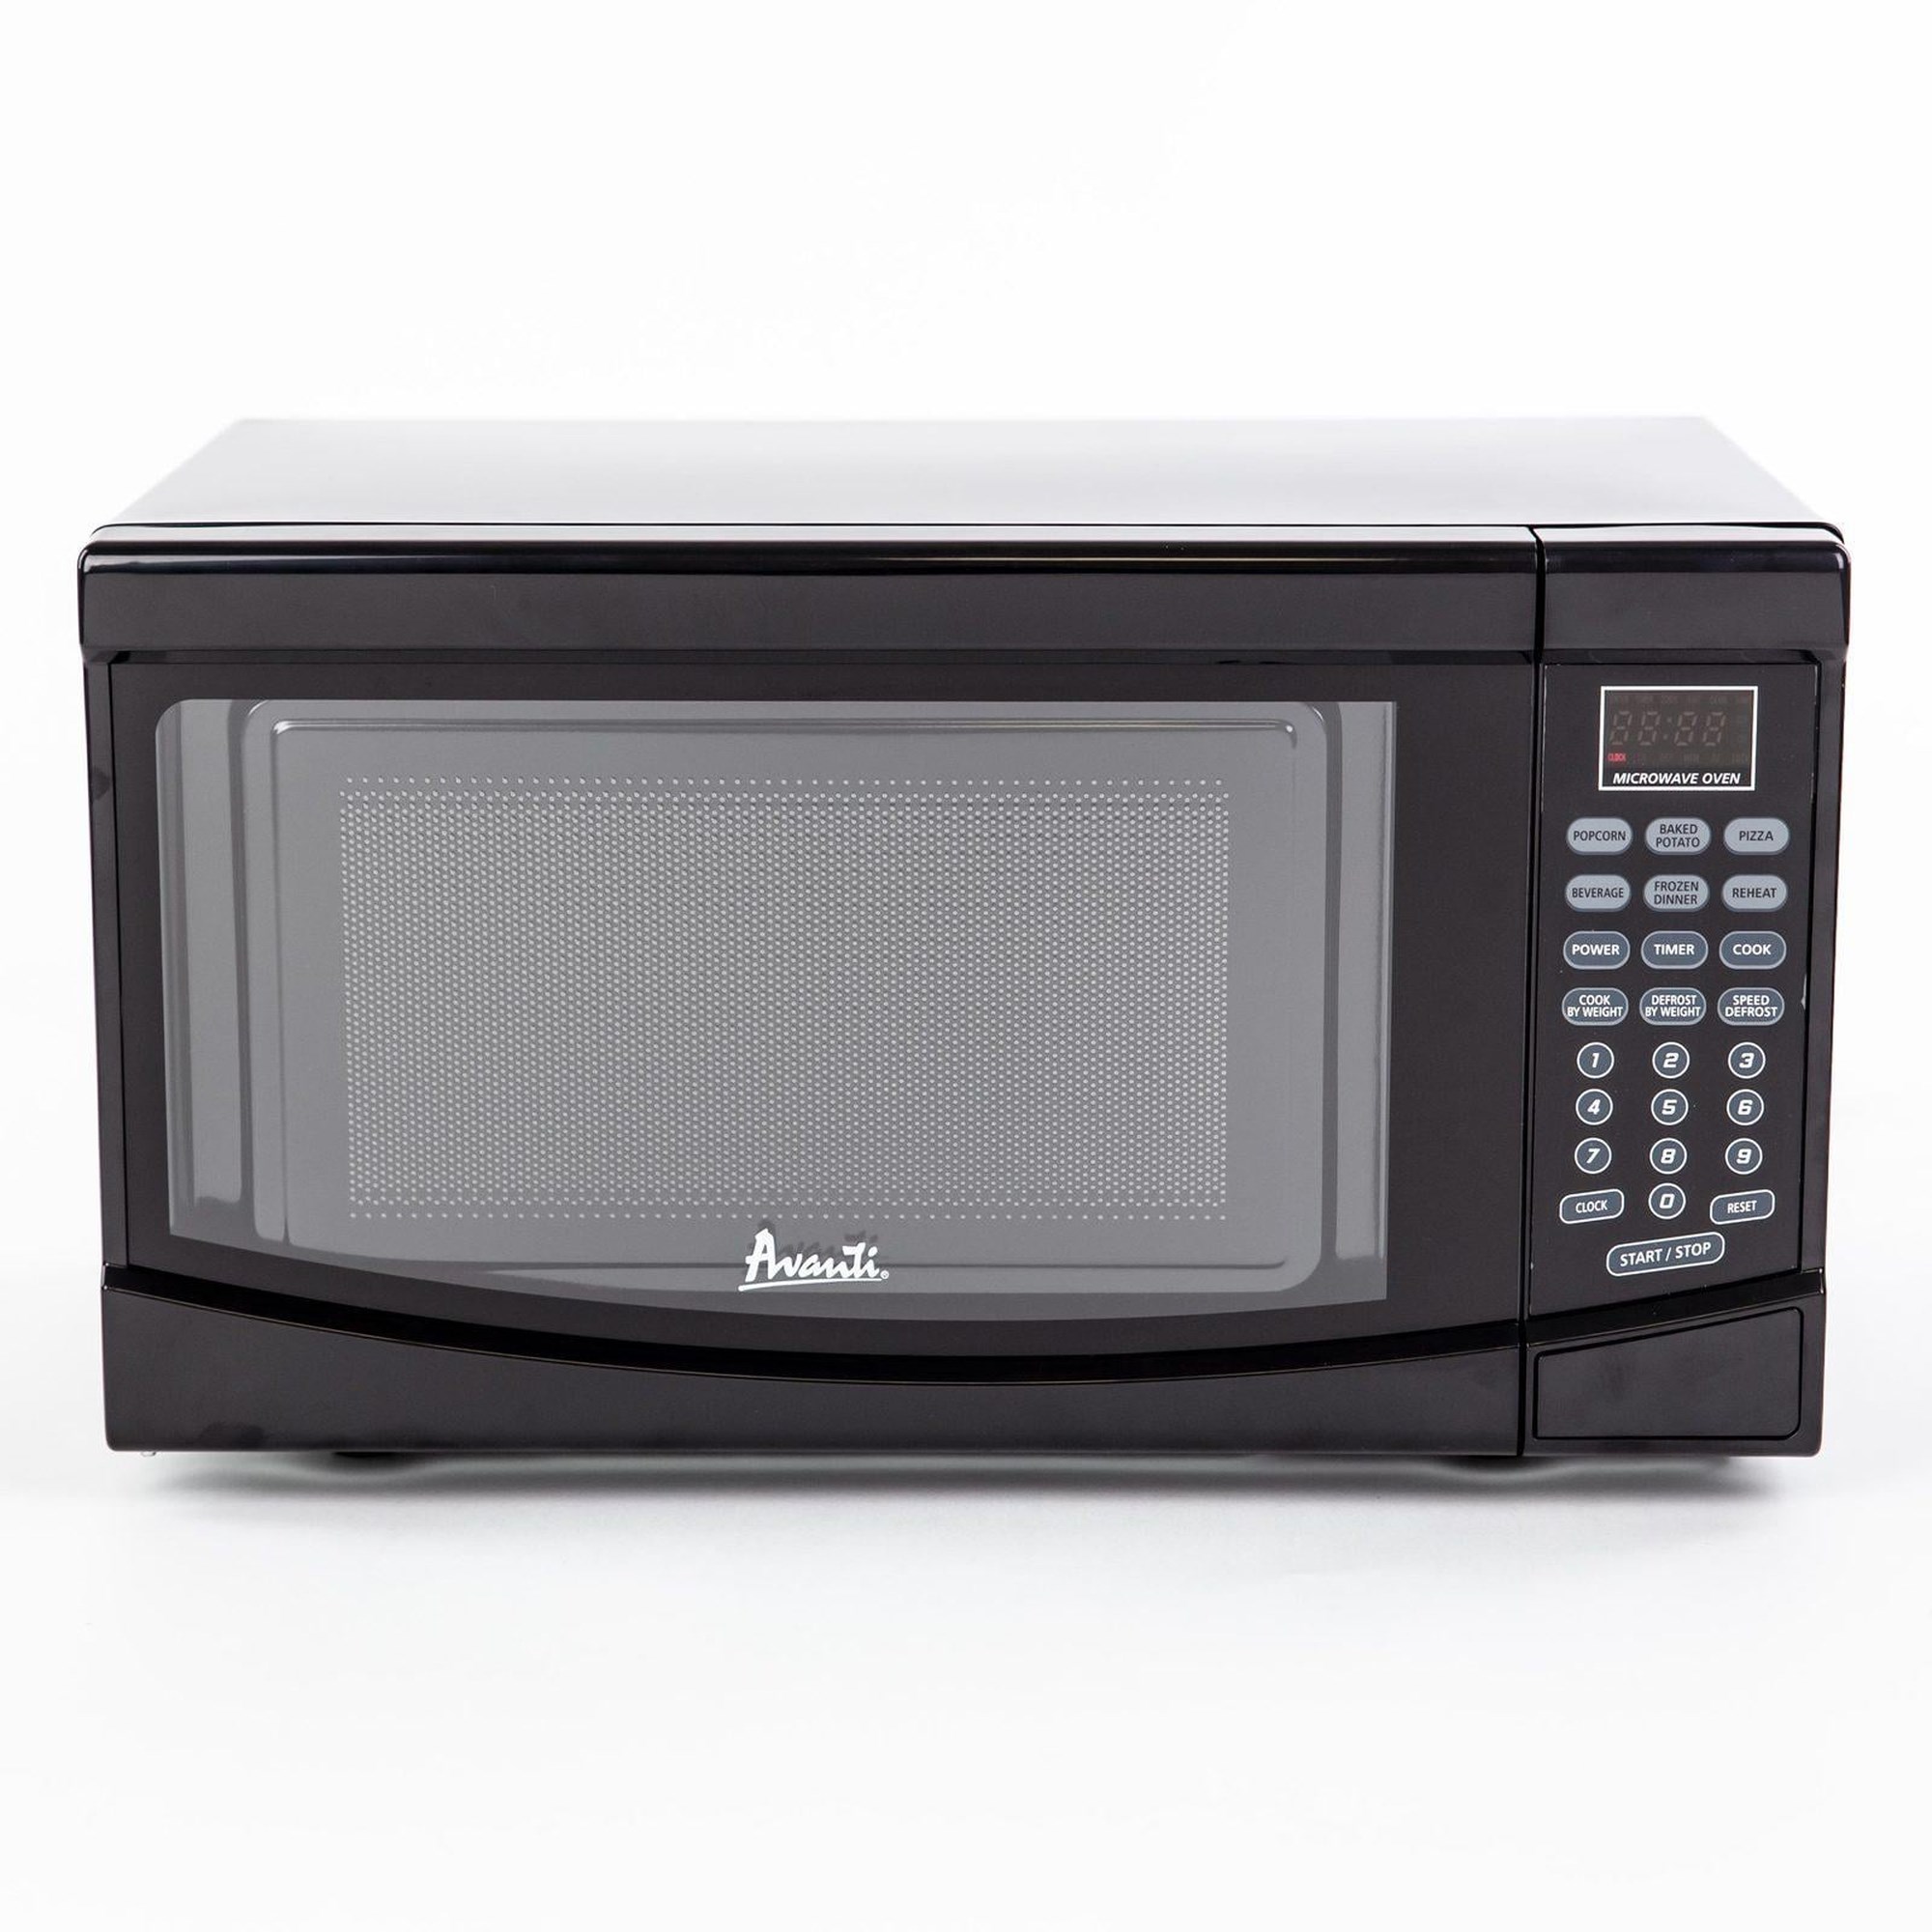 MT7V1B by Avanti - 0.7 cu. ft. Microwave Oven